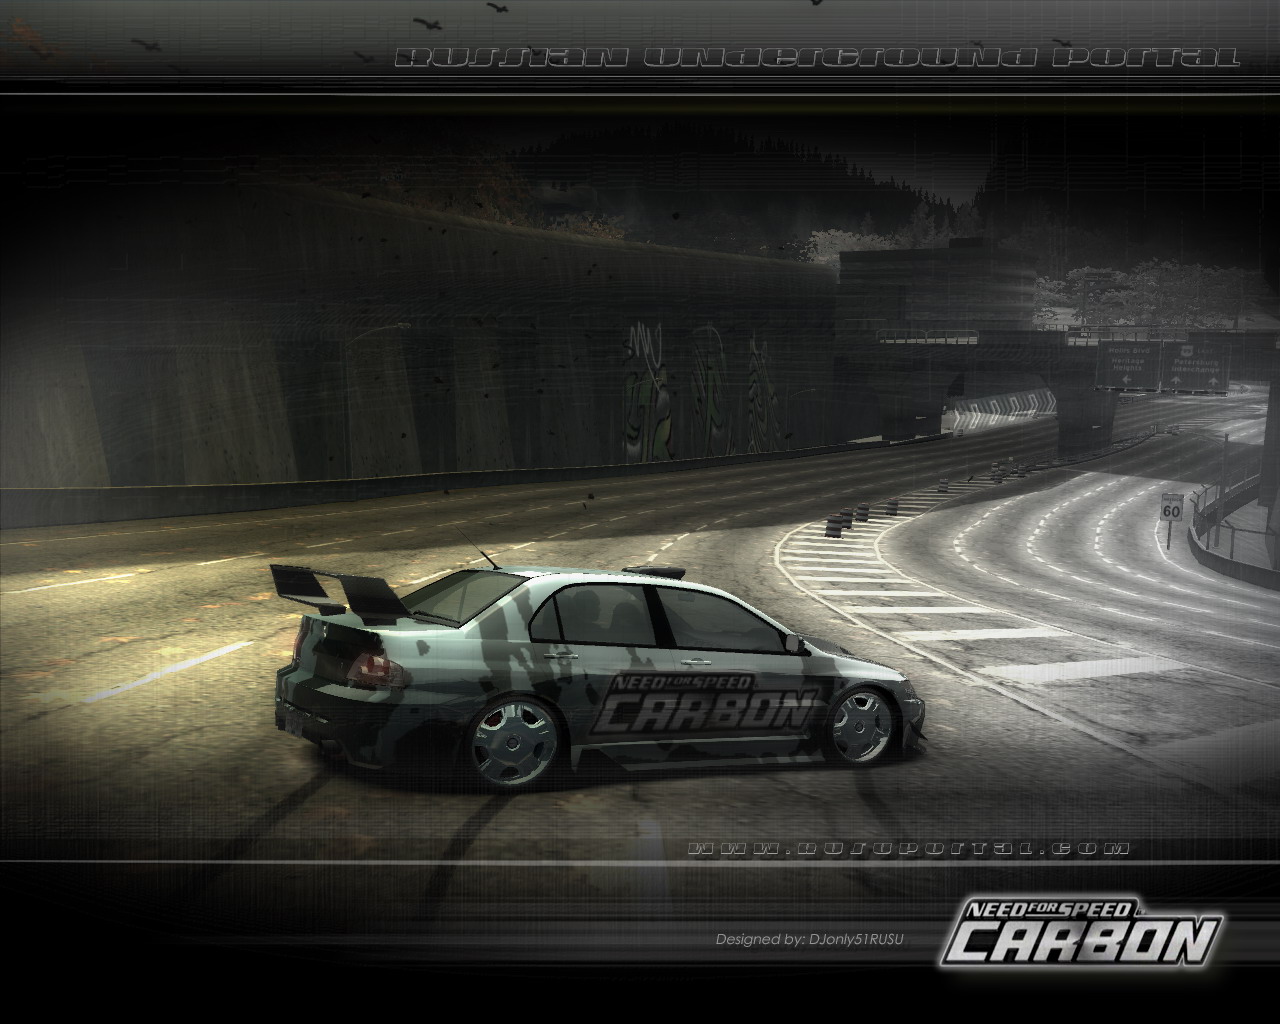 http://needforspeed.sk/pictures/galeria/nfsc/wall/1684_big.jpg